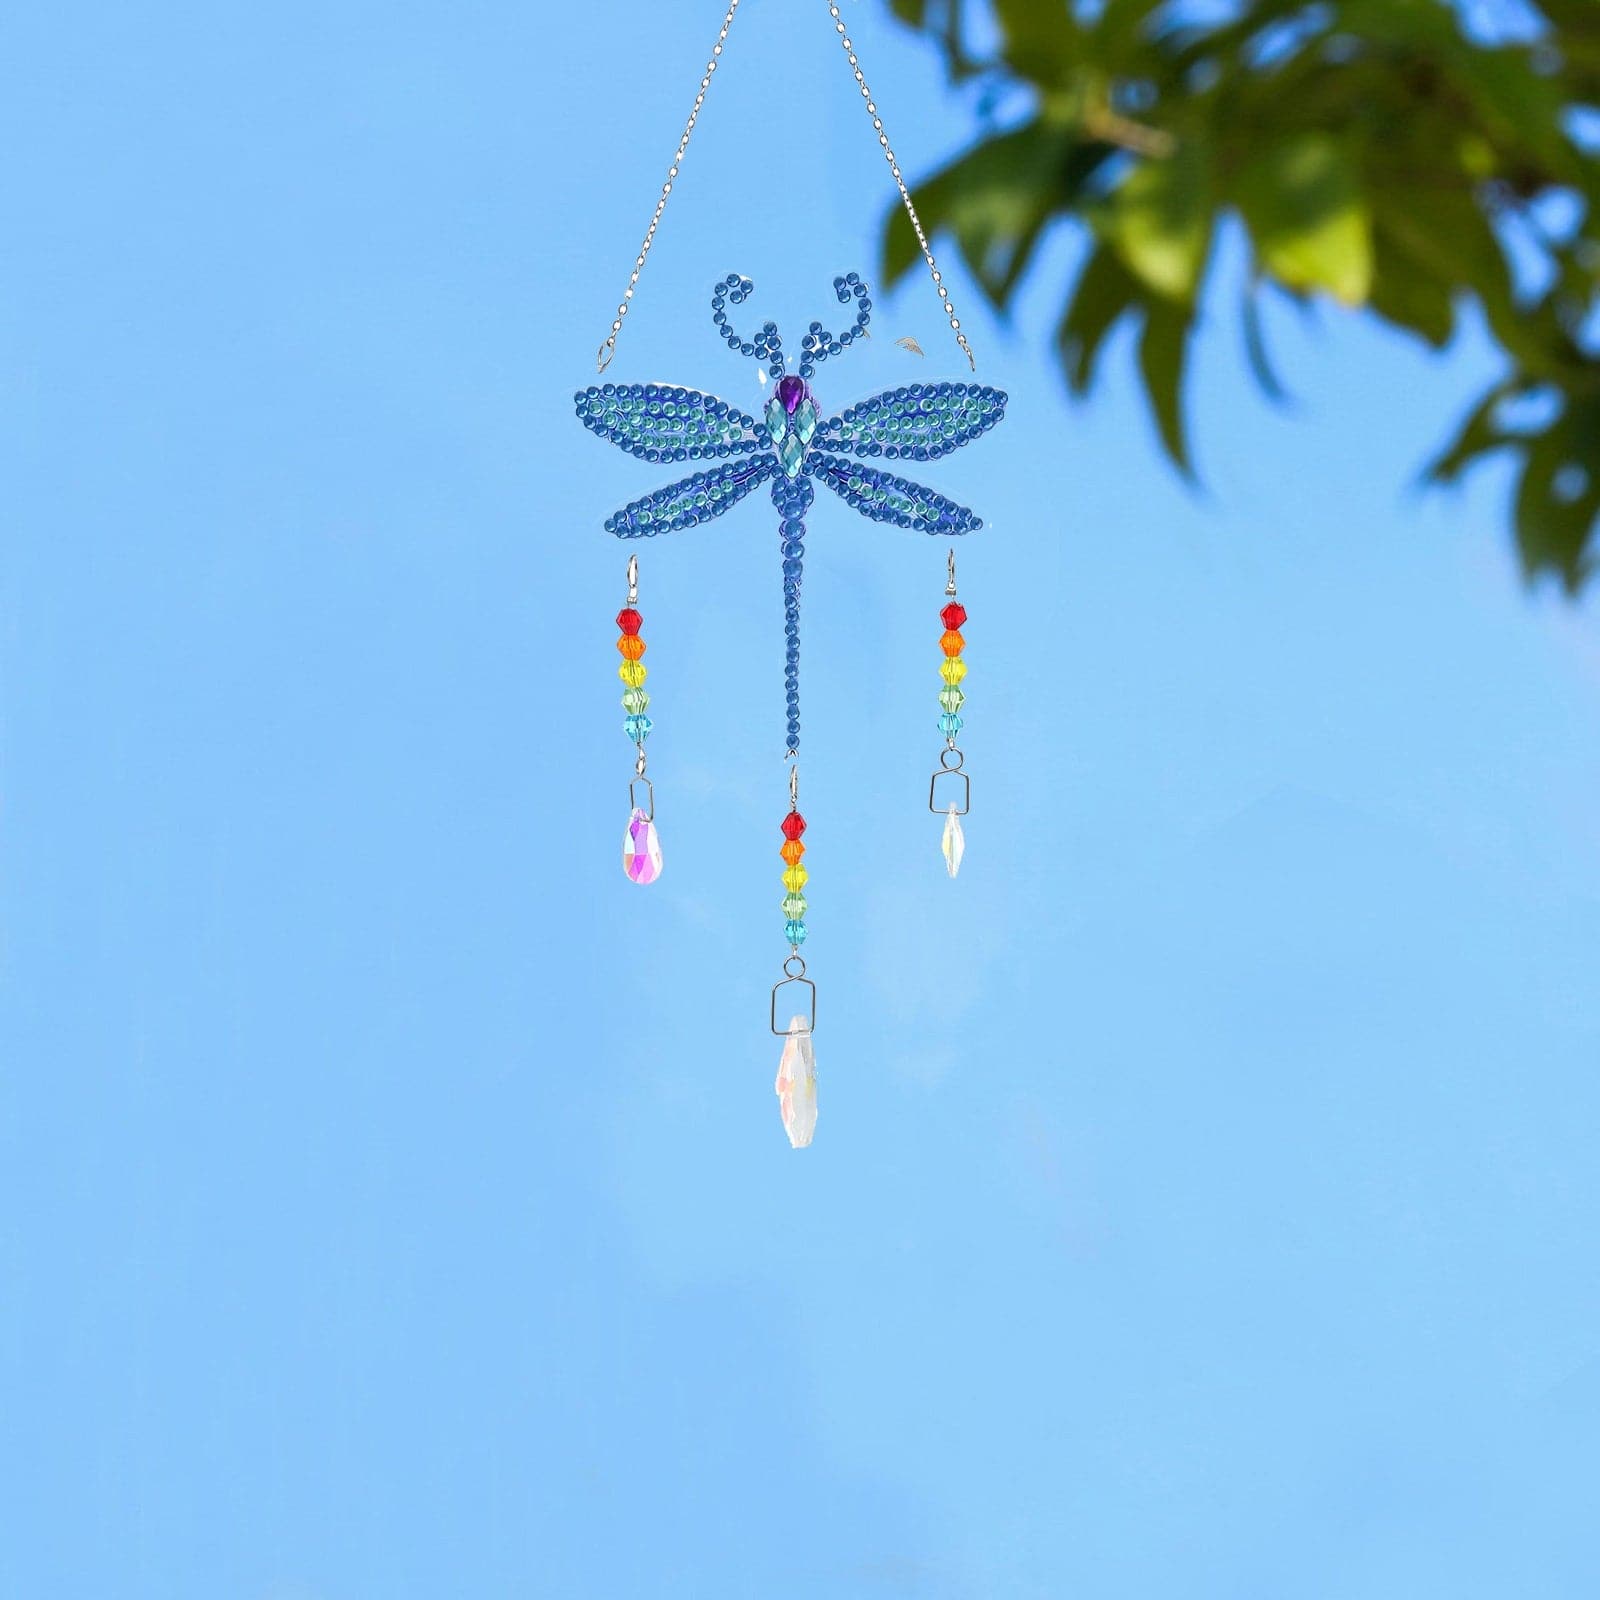 5D DIY Special Shaped  Wind Chimes-Dragonfly ktclubs.com